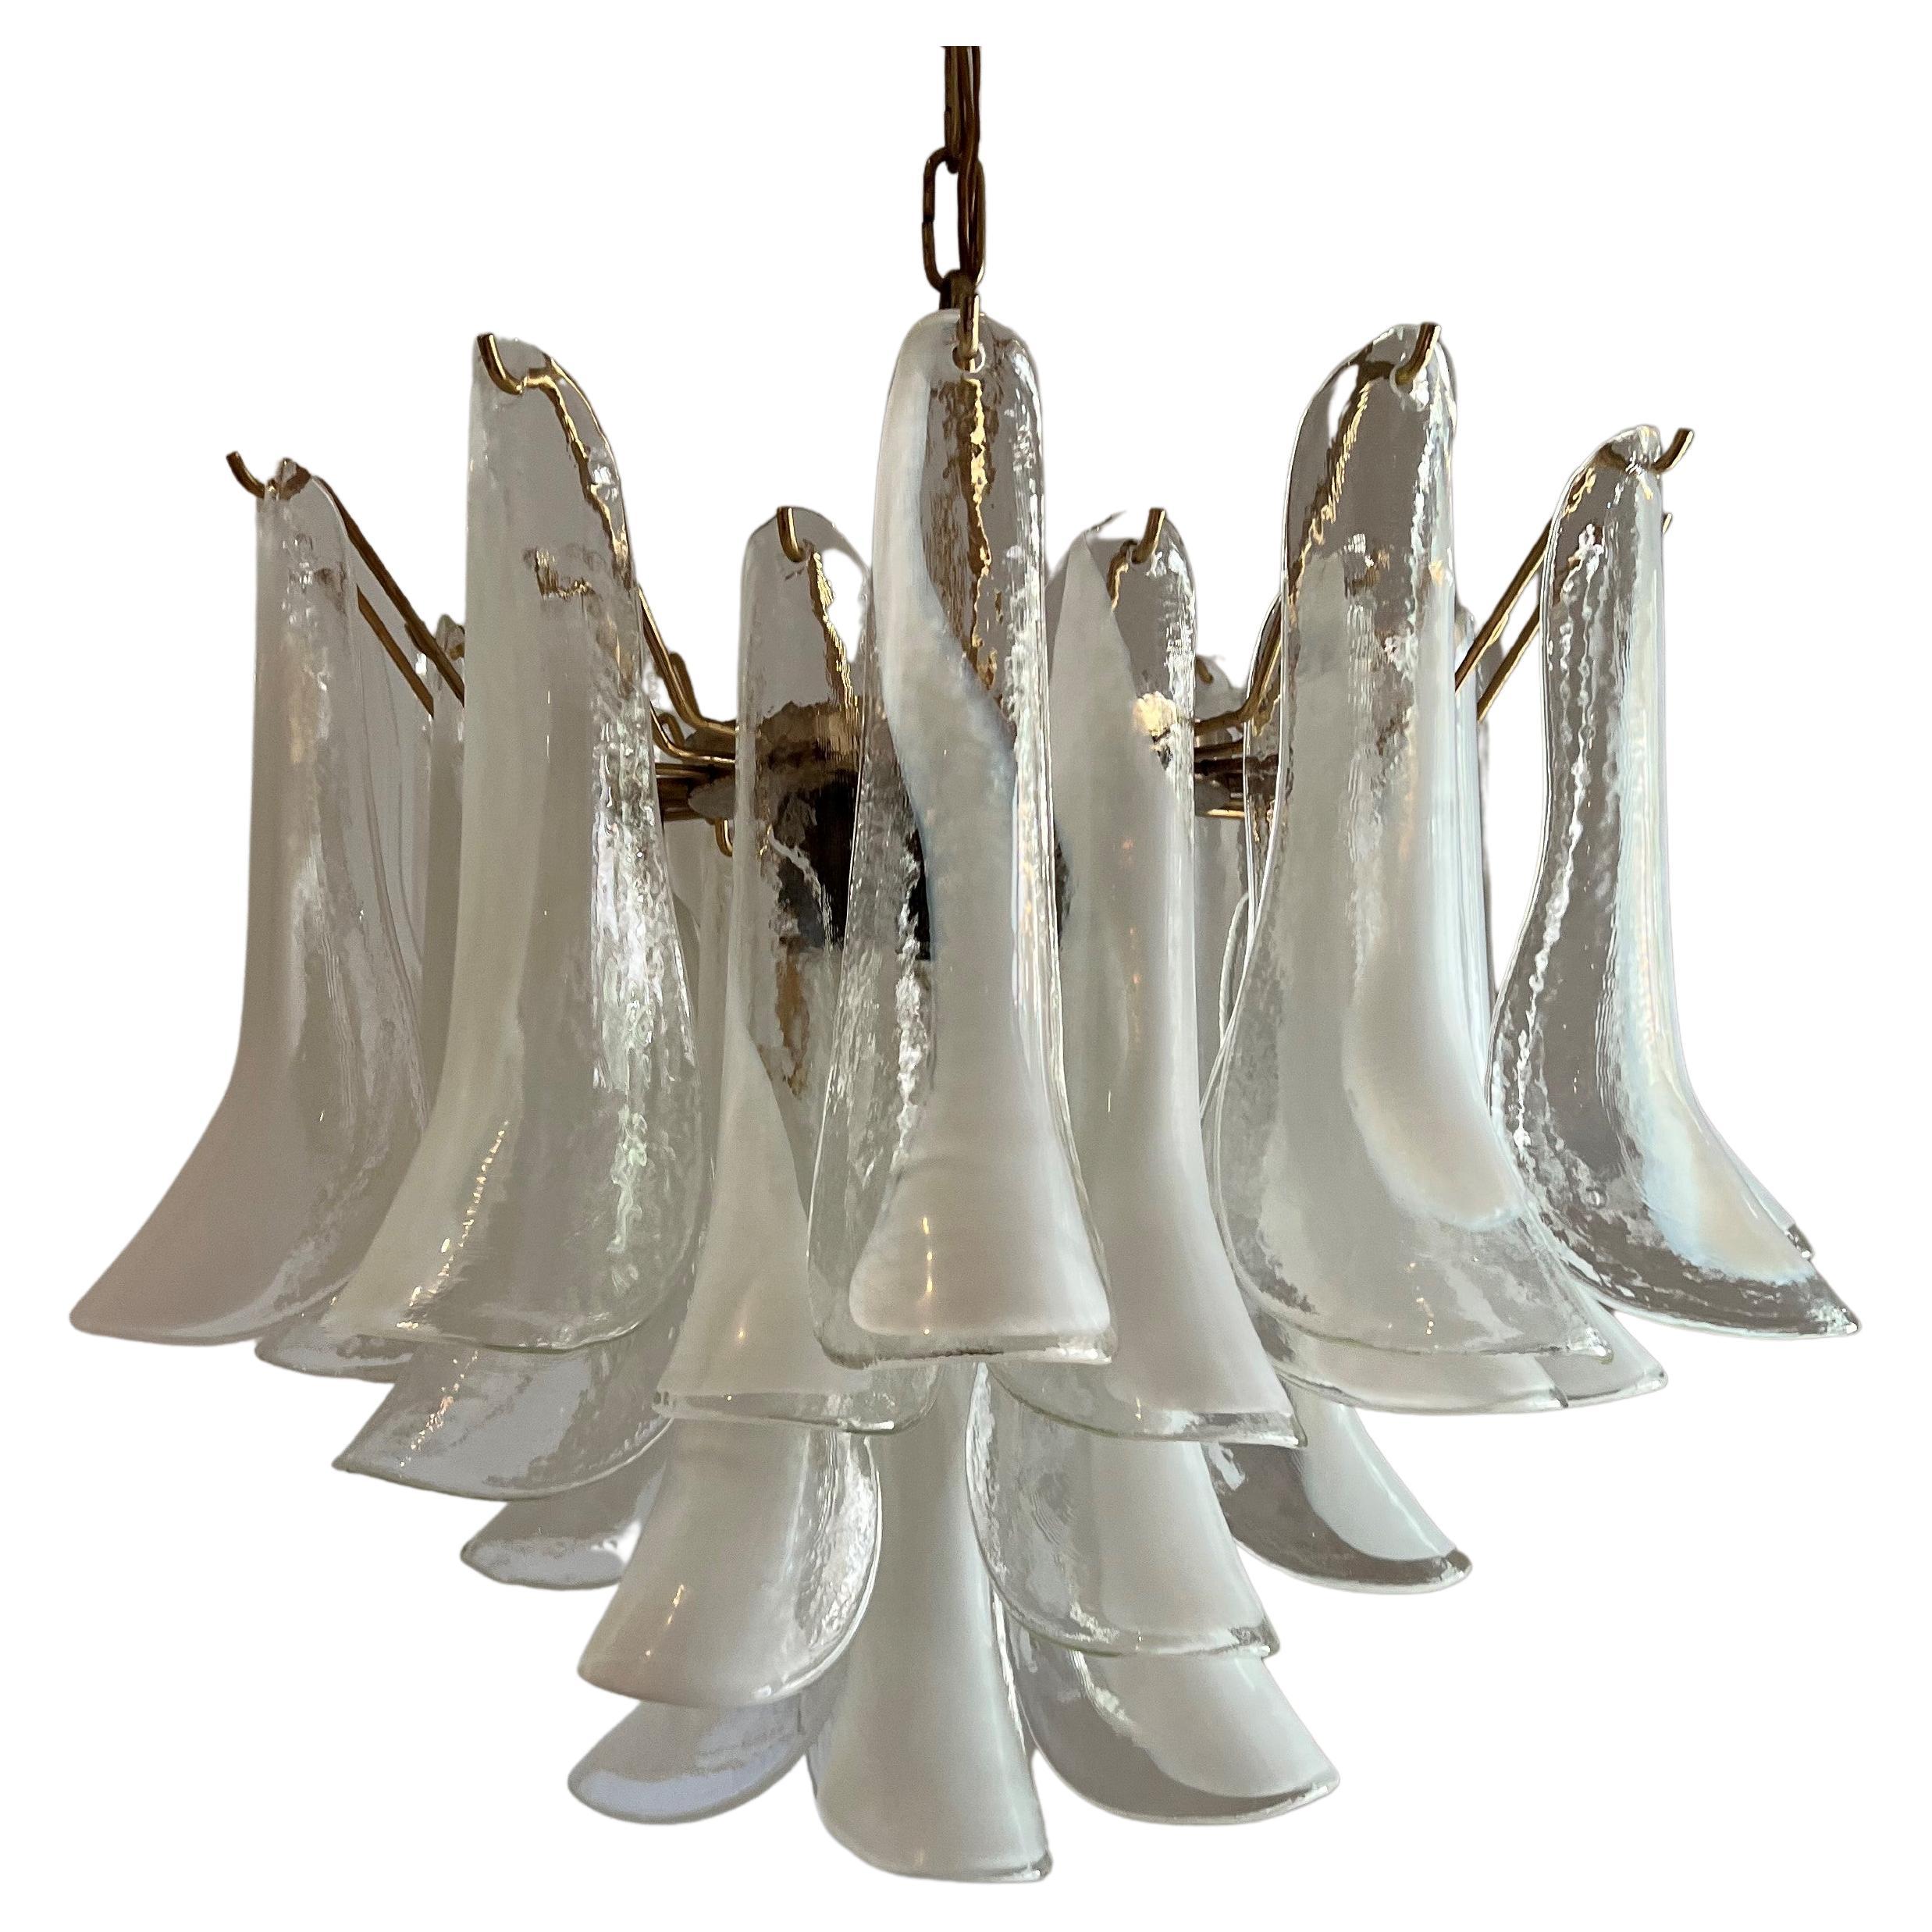 Two Identical Signed Mid-Century Modern Chandeliers, La Murrina in Murano Glass